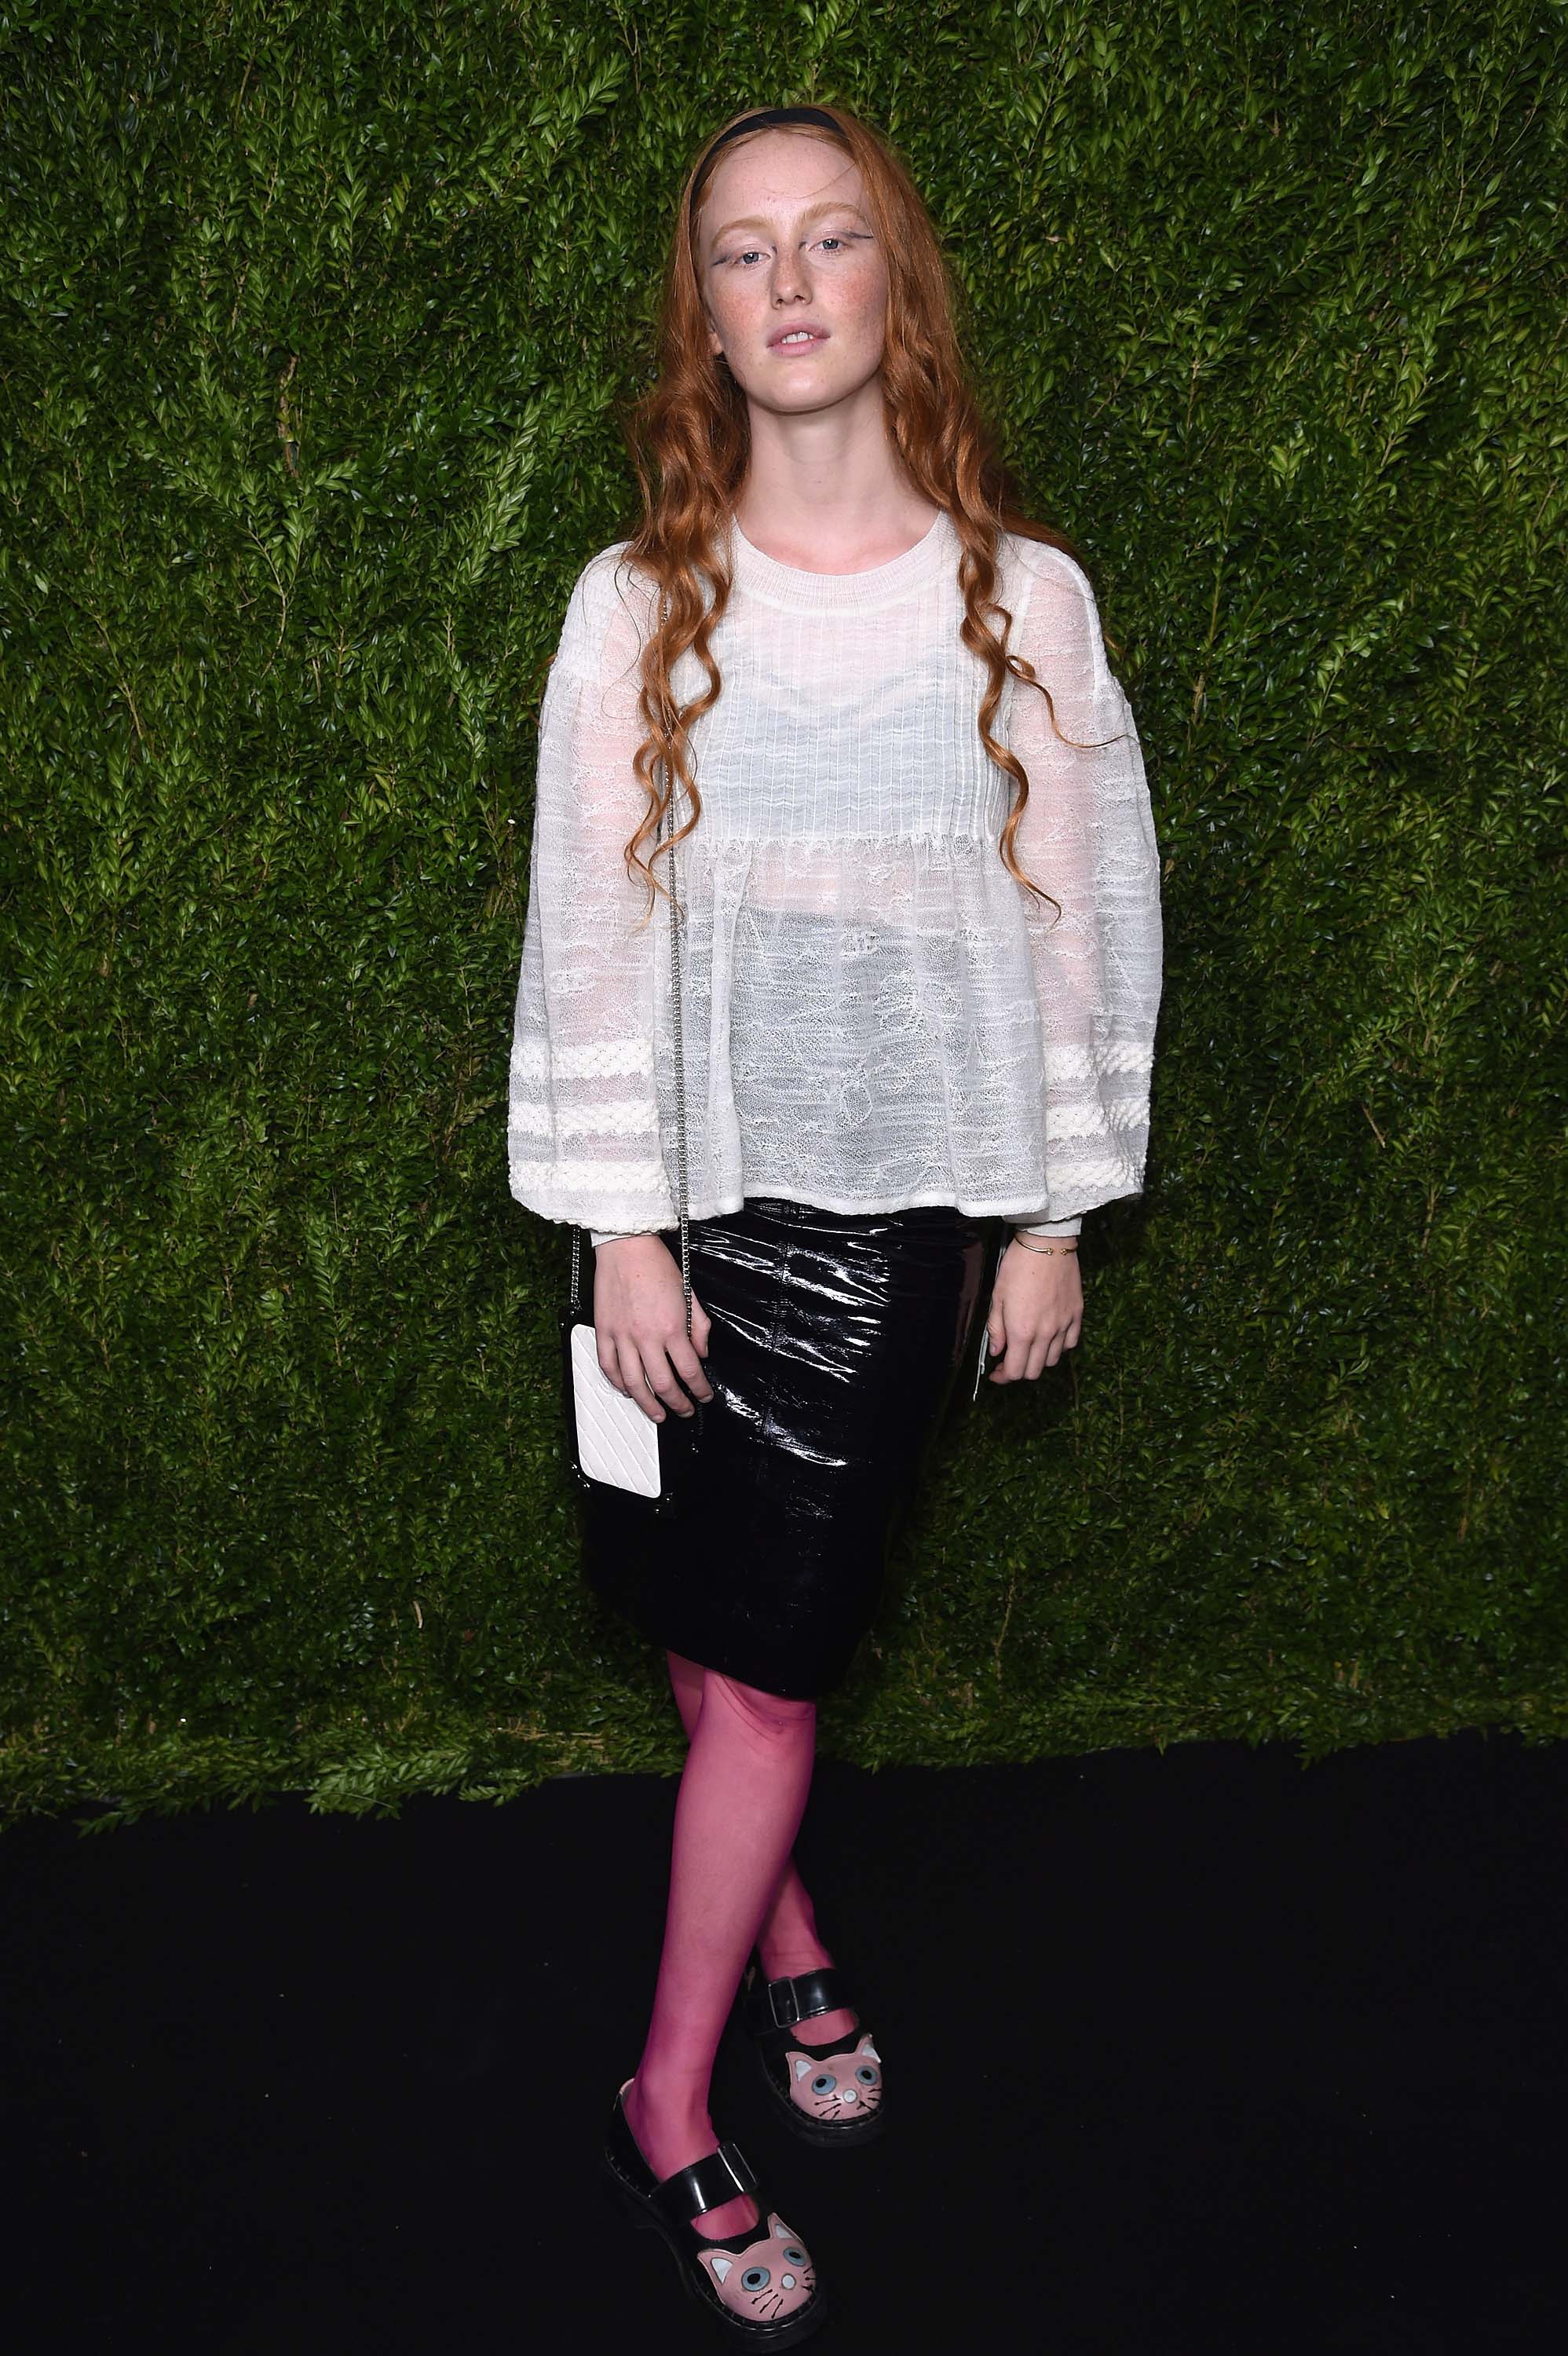 India Salvor Menuez attends the Chanel Fine Jewelry Dinner